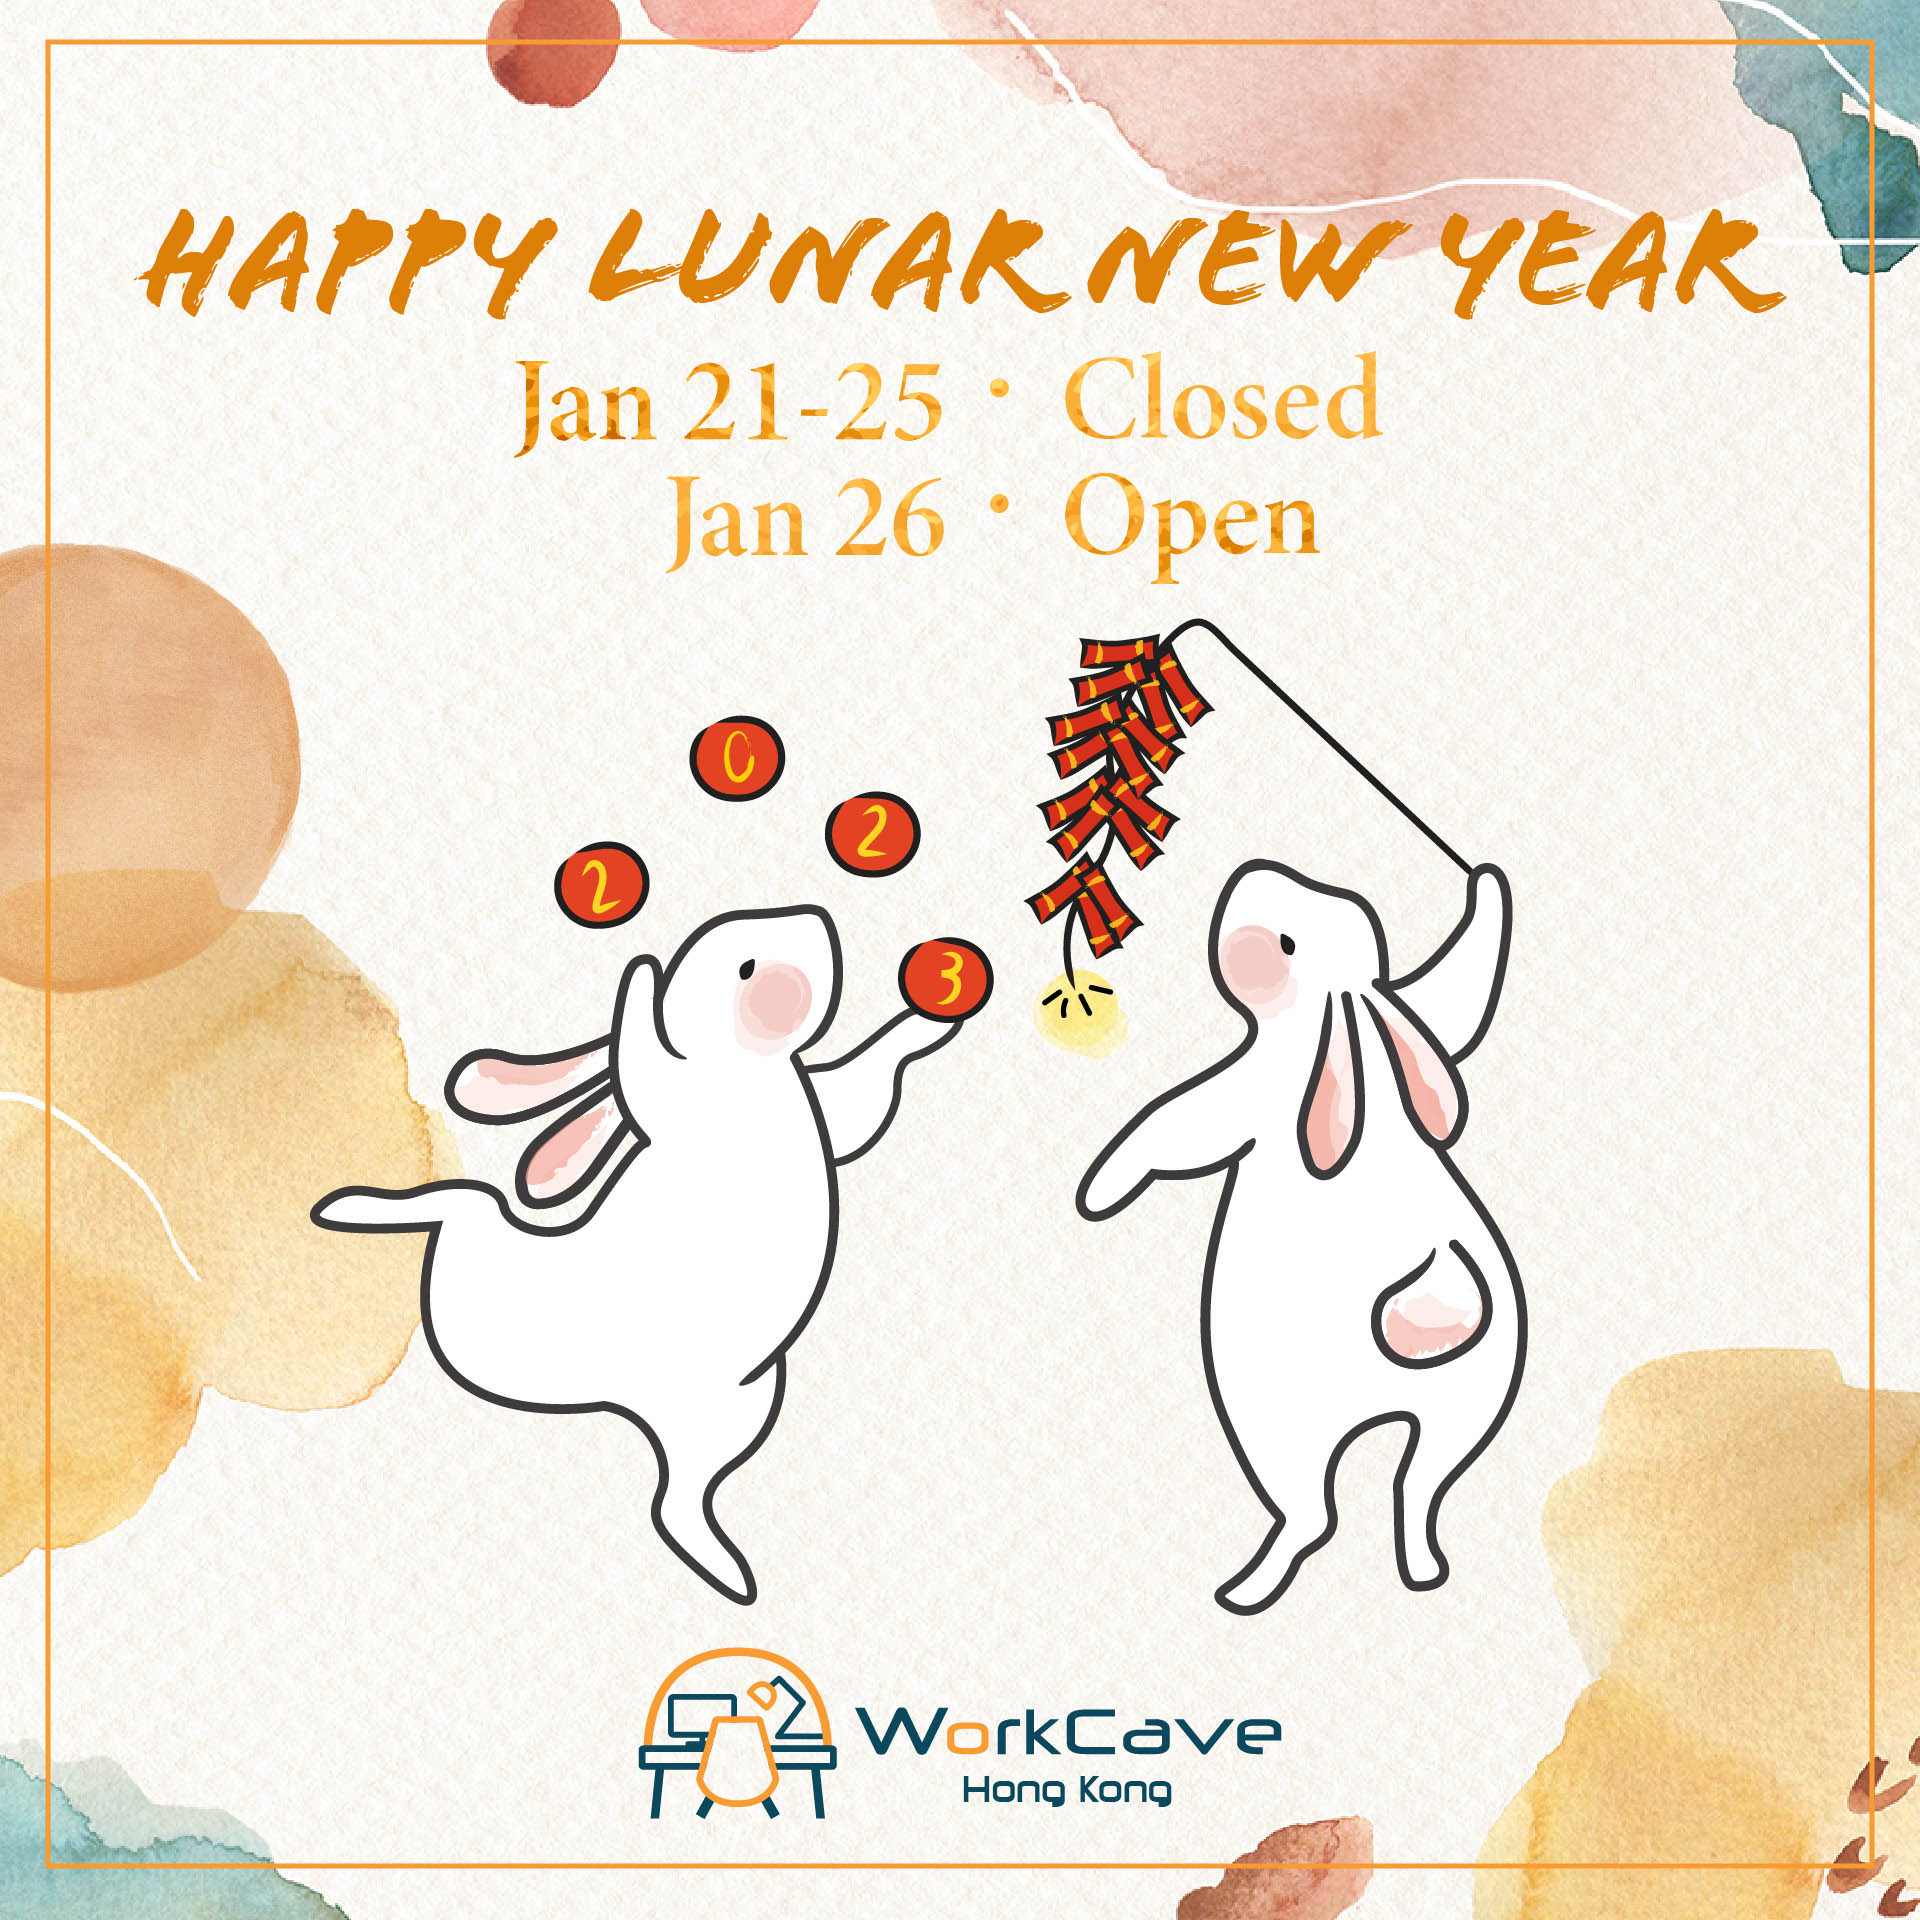 Holiday special service hours announcement, decorated with rabbits juggling balls and holding firecrackers to celebrate Lunar New Year